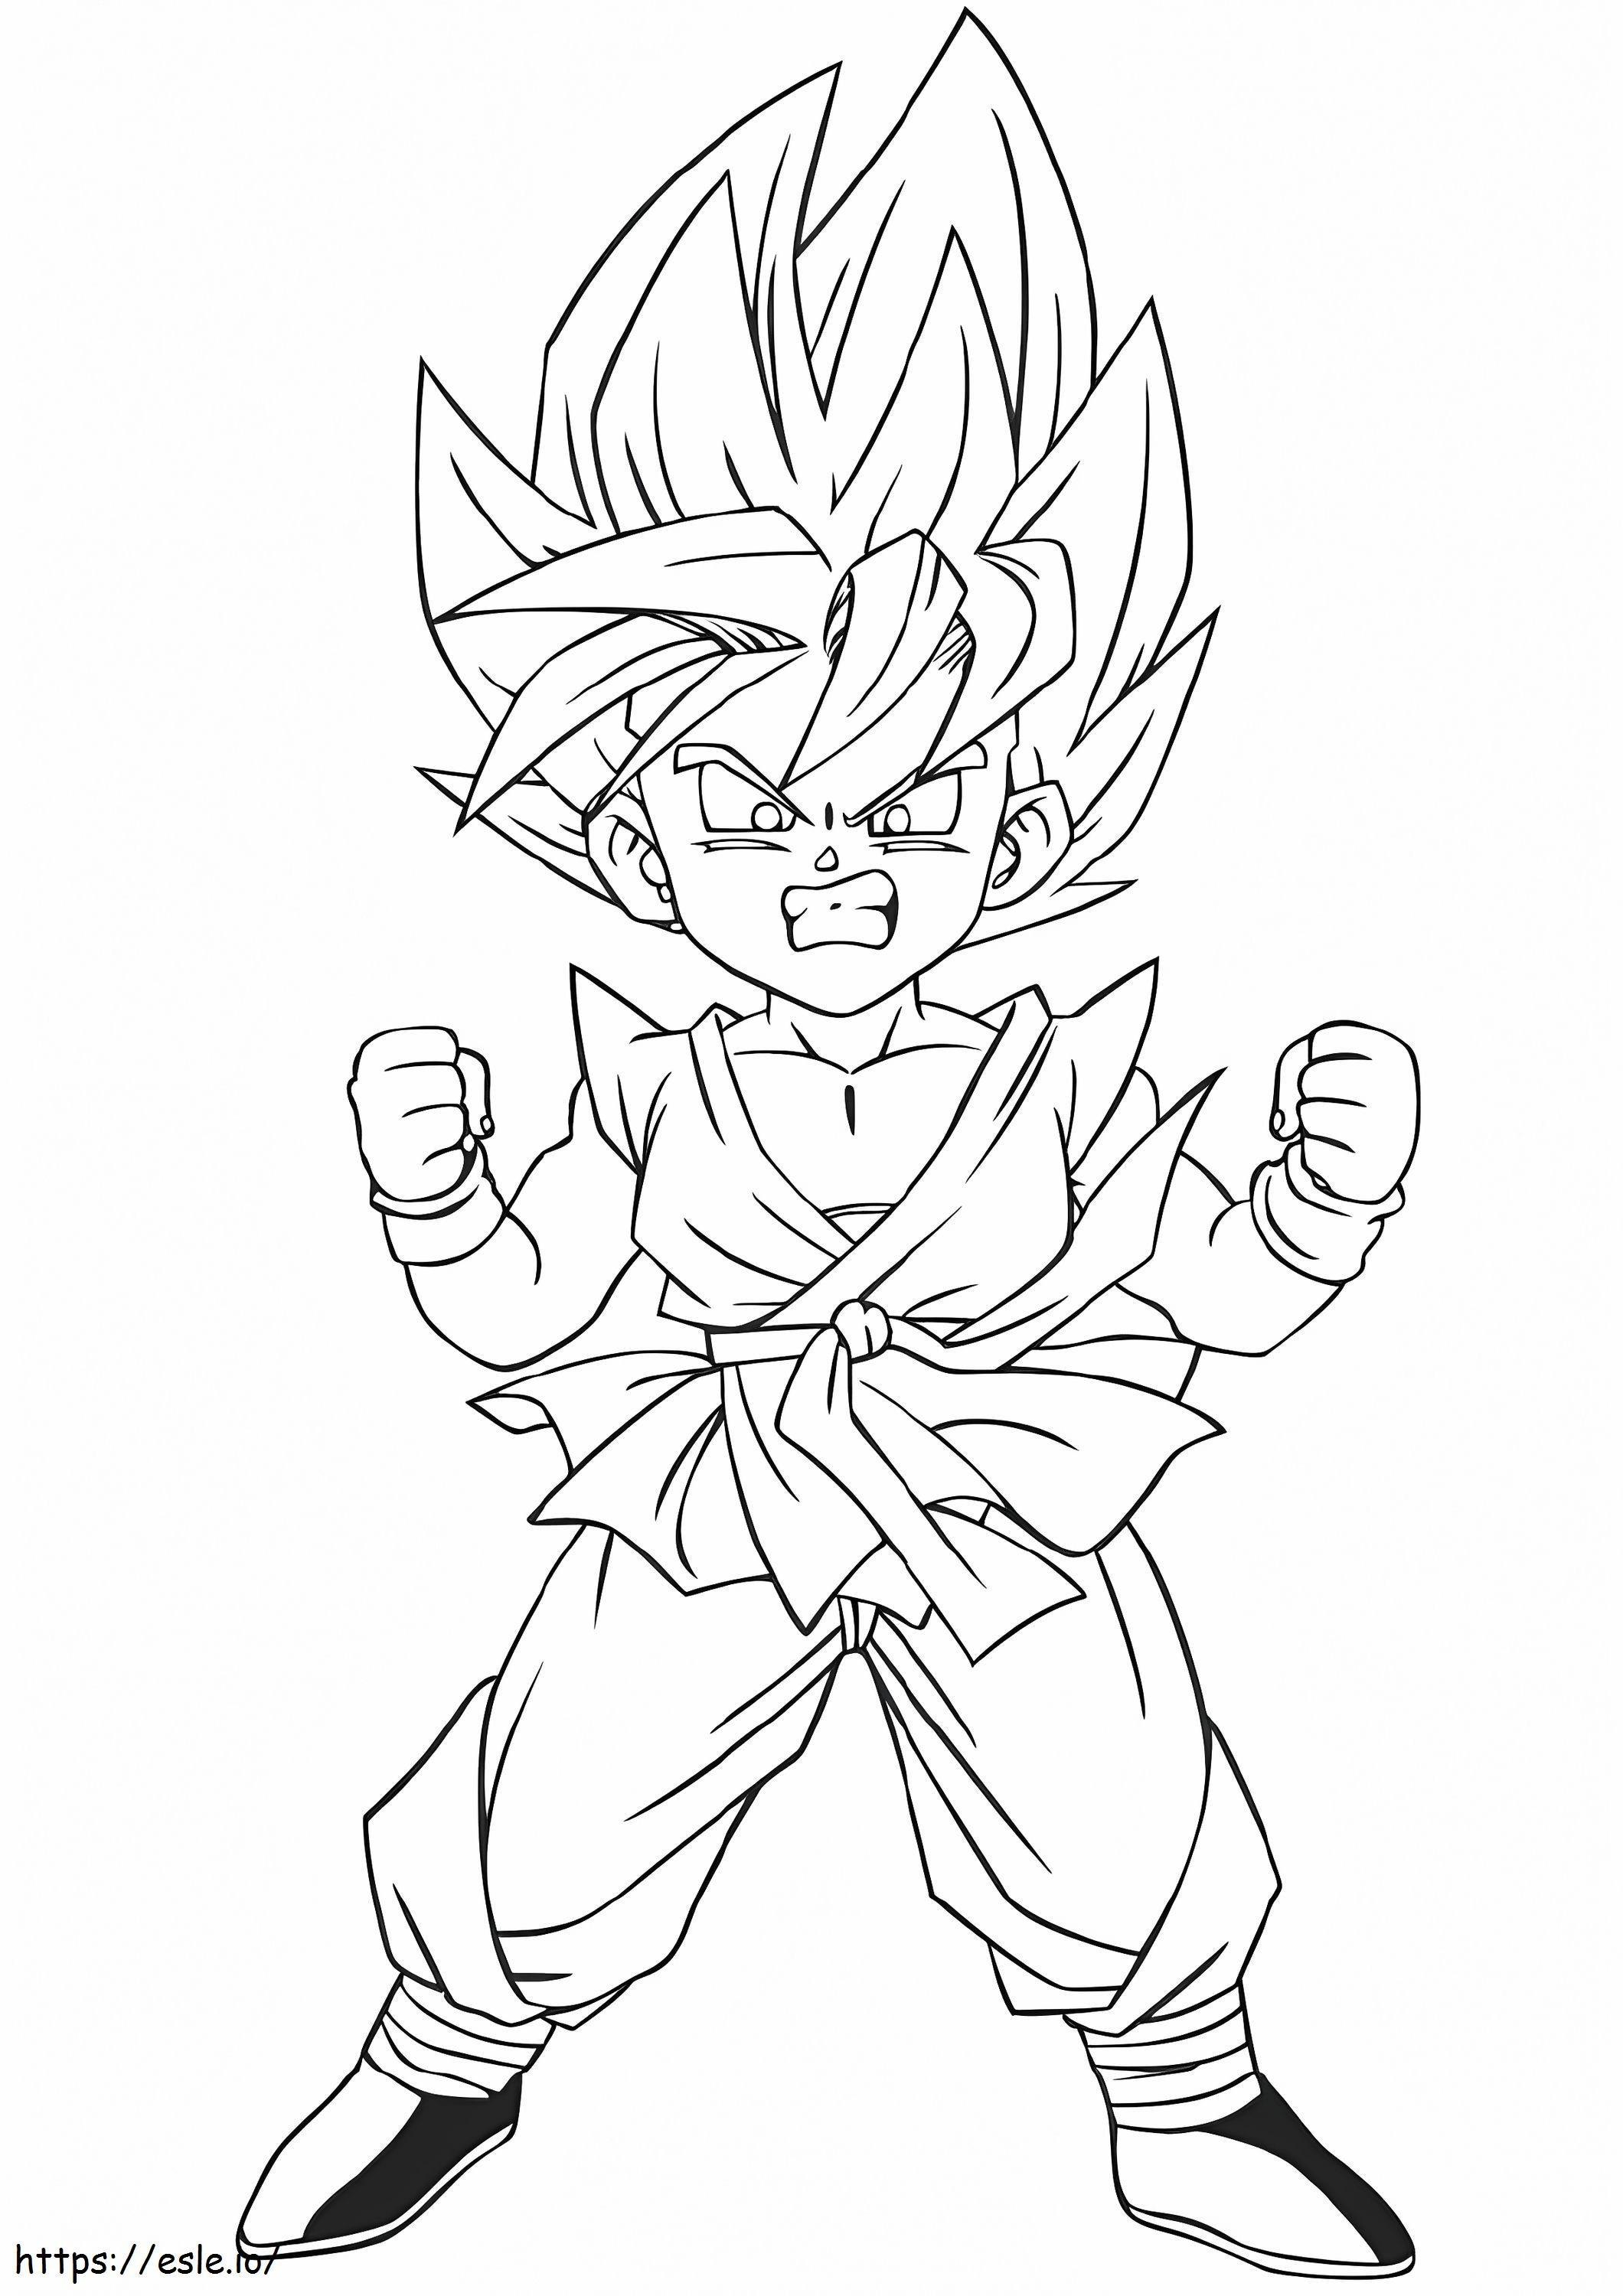 1526552758The Child Goku Colors A4 coloring page